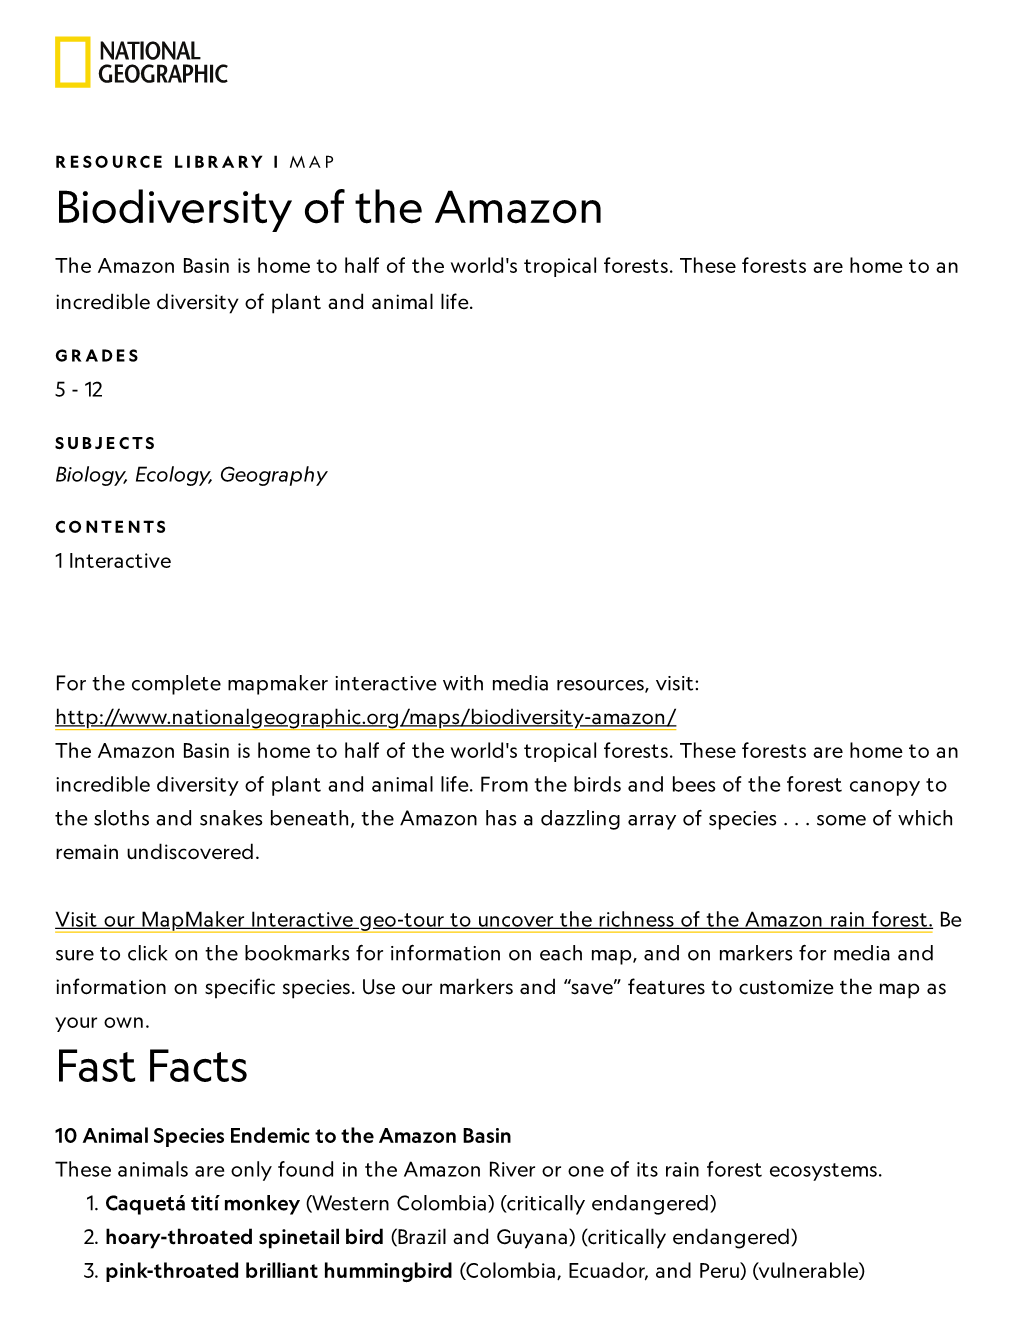 Biodiversity of the Amazon Fast Facts